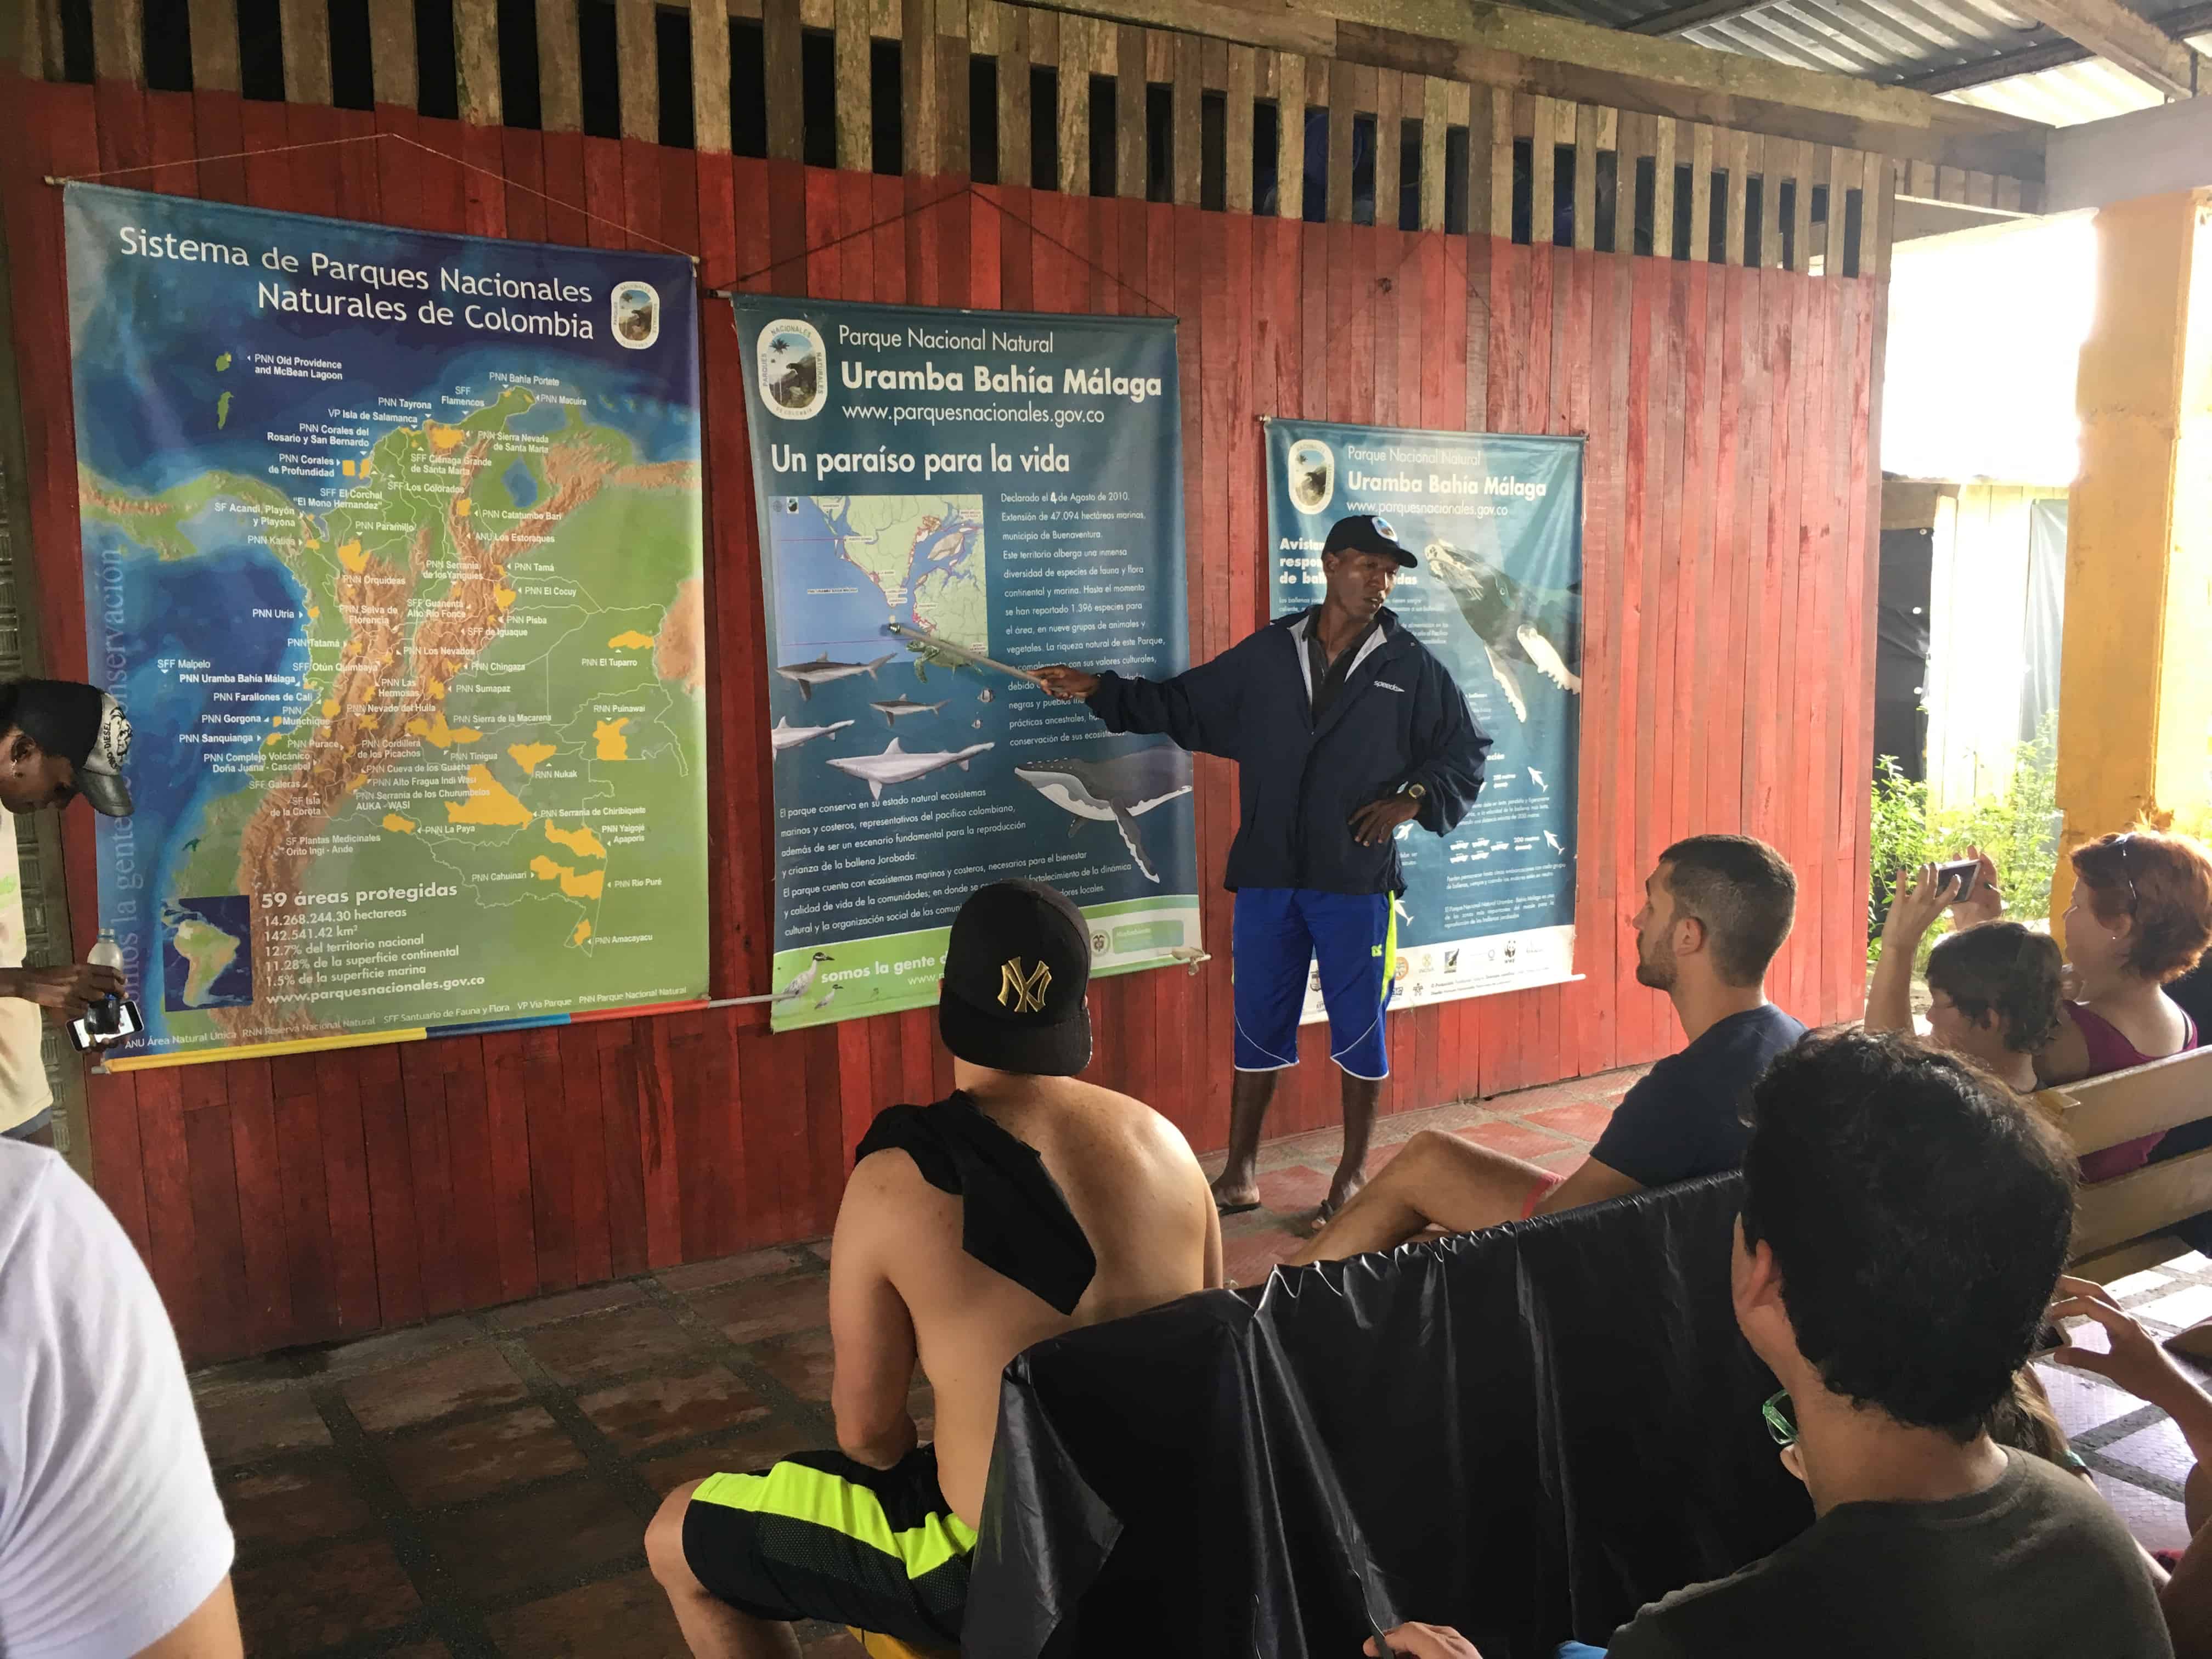 A guide lecturing about the whales in Juanchaco, Valle del Cauca, Colombia